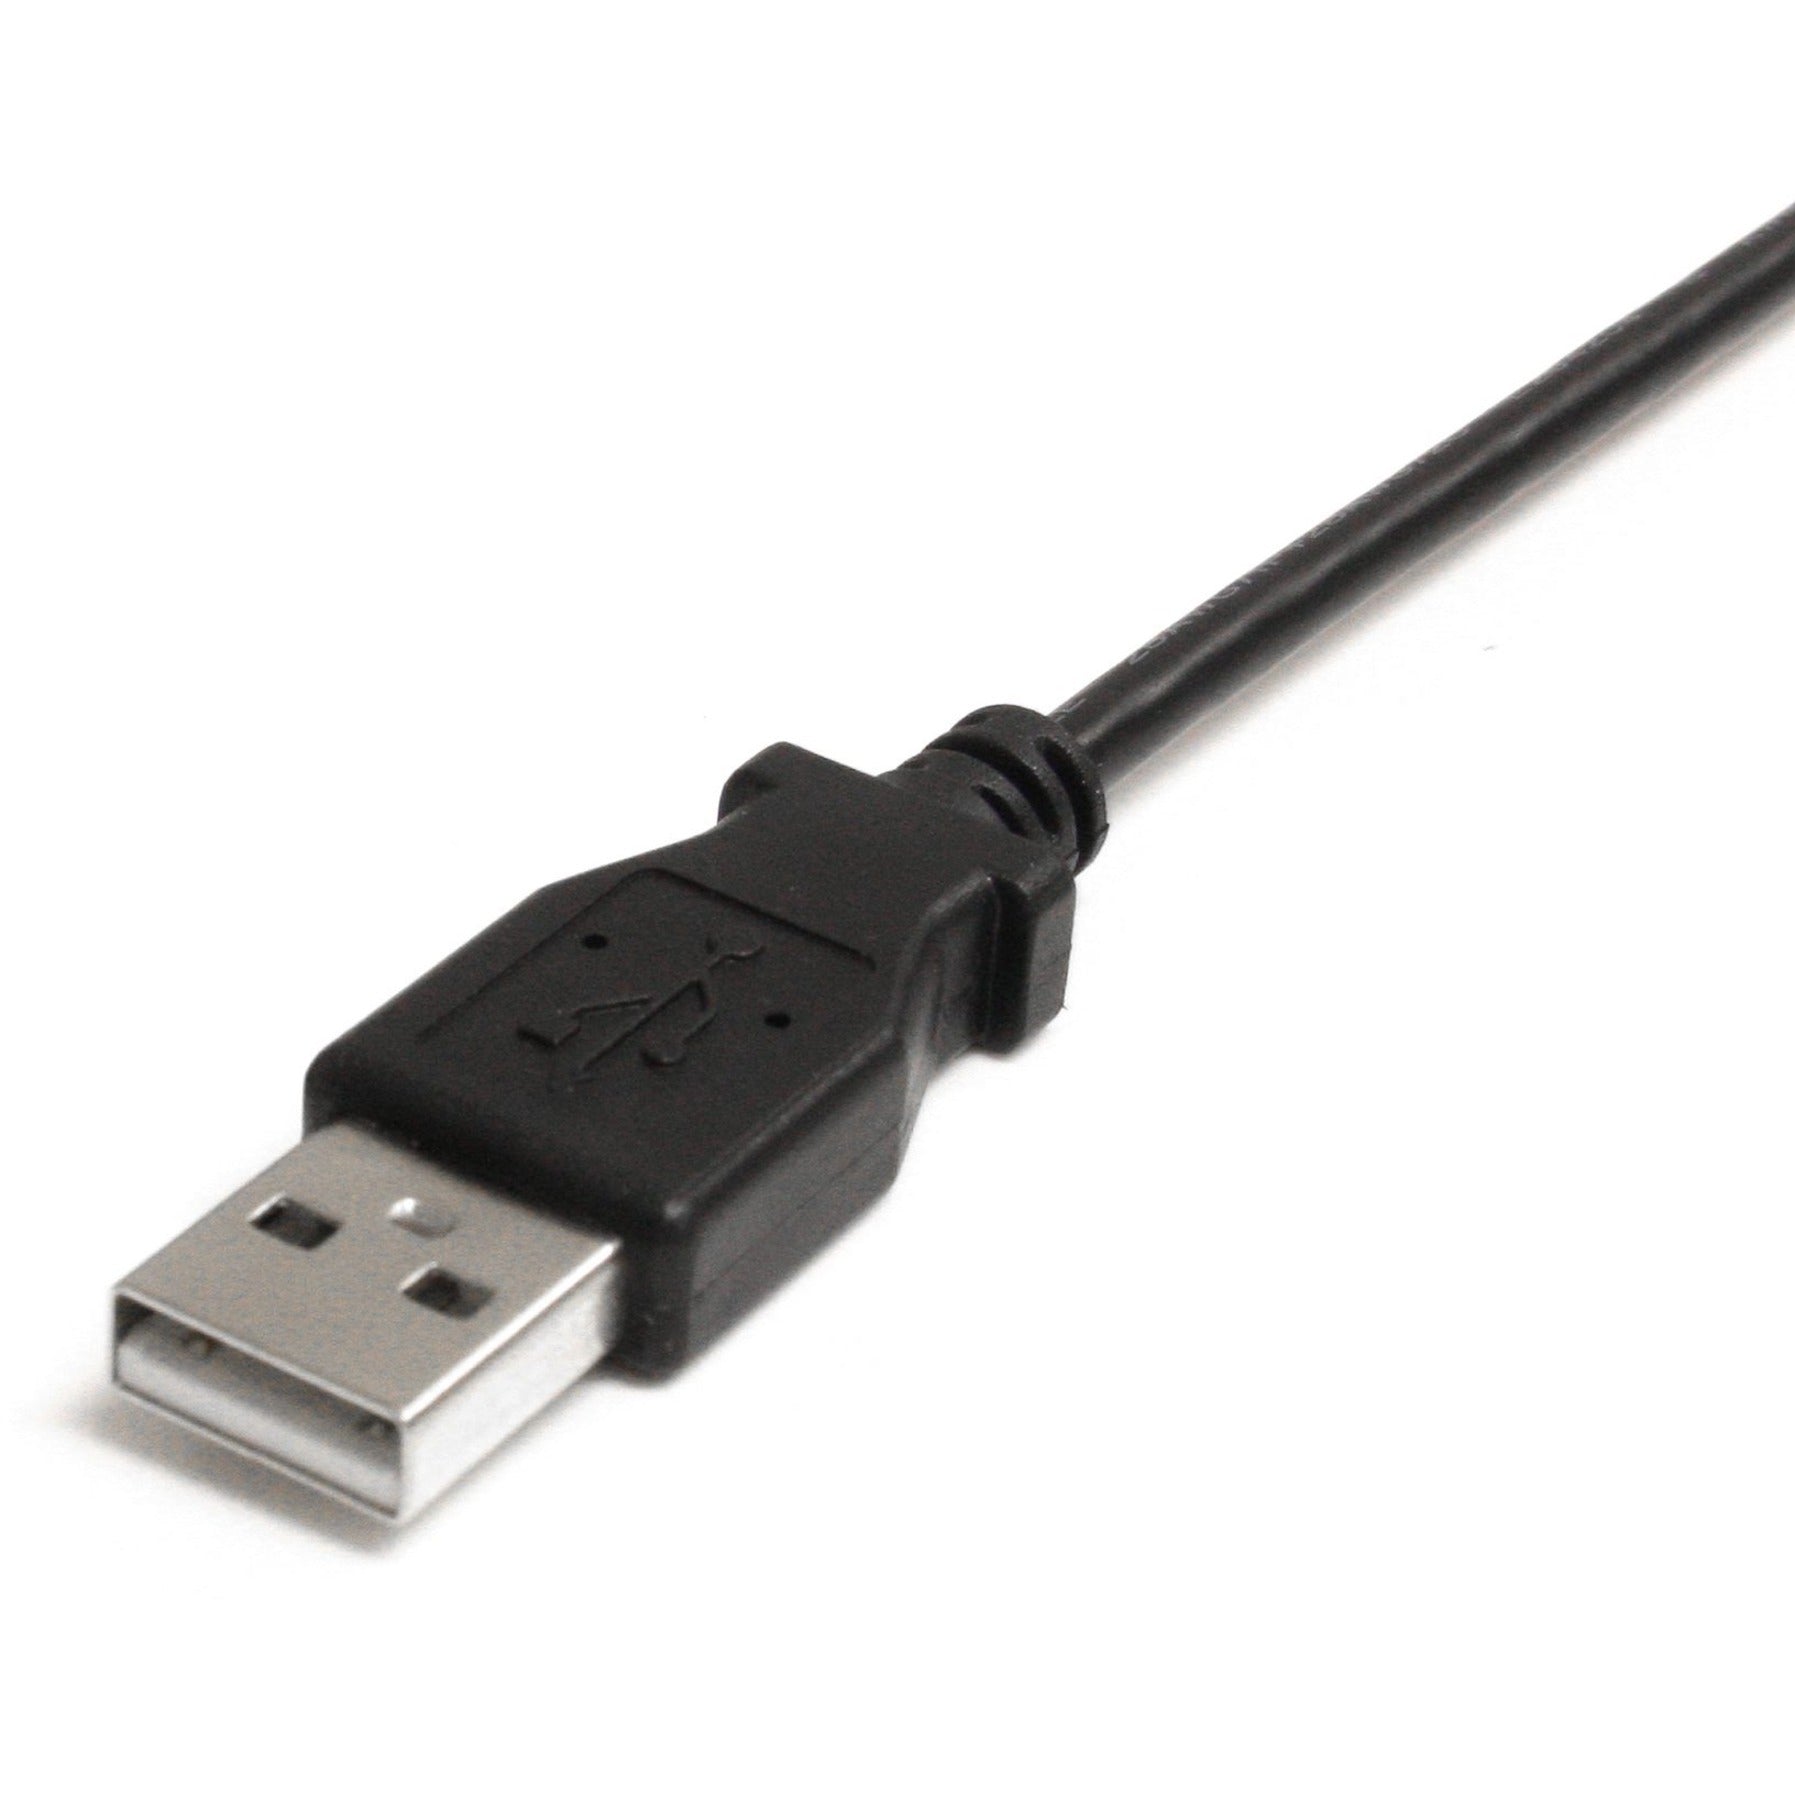 StarTech.com USB2HABM6LA 6 ft Mini USB Cable - A to Left Angle Mini B, Data Transfer Cable with Strain Relief, Molded Connector, 480 Mbit/s Data Transfer Rate